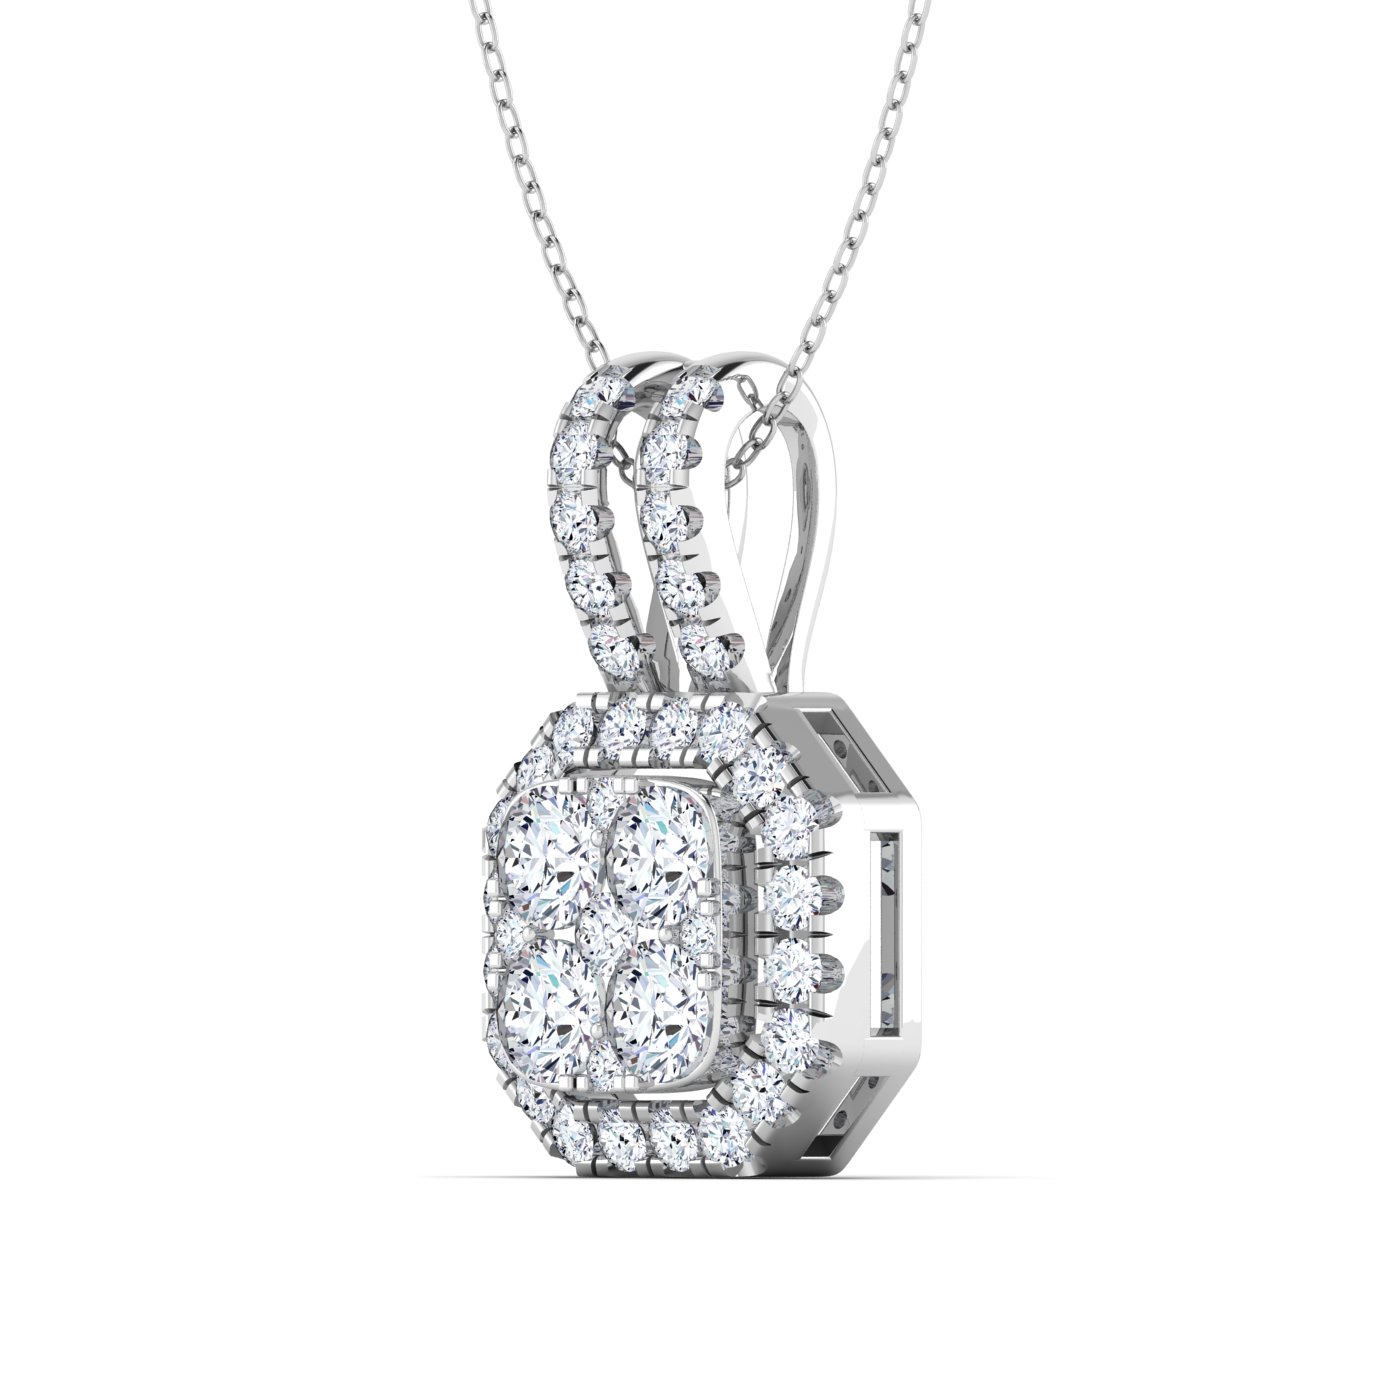 1.29 Ctw Lab-Created Diamond Necklace Pendant Made in 14k White Gold